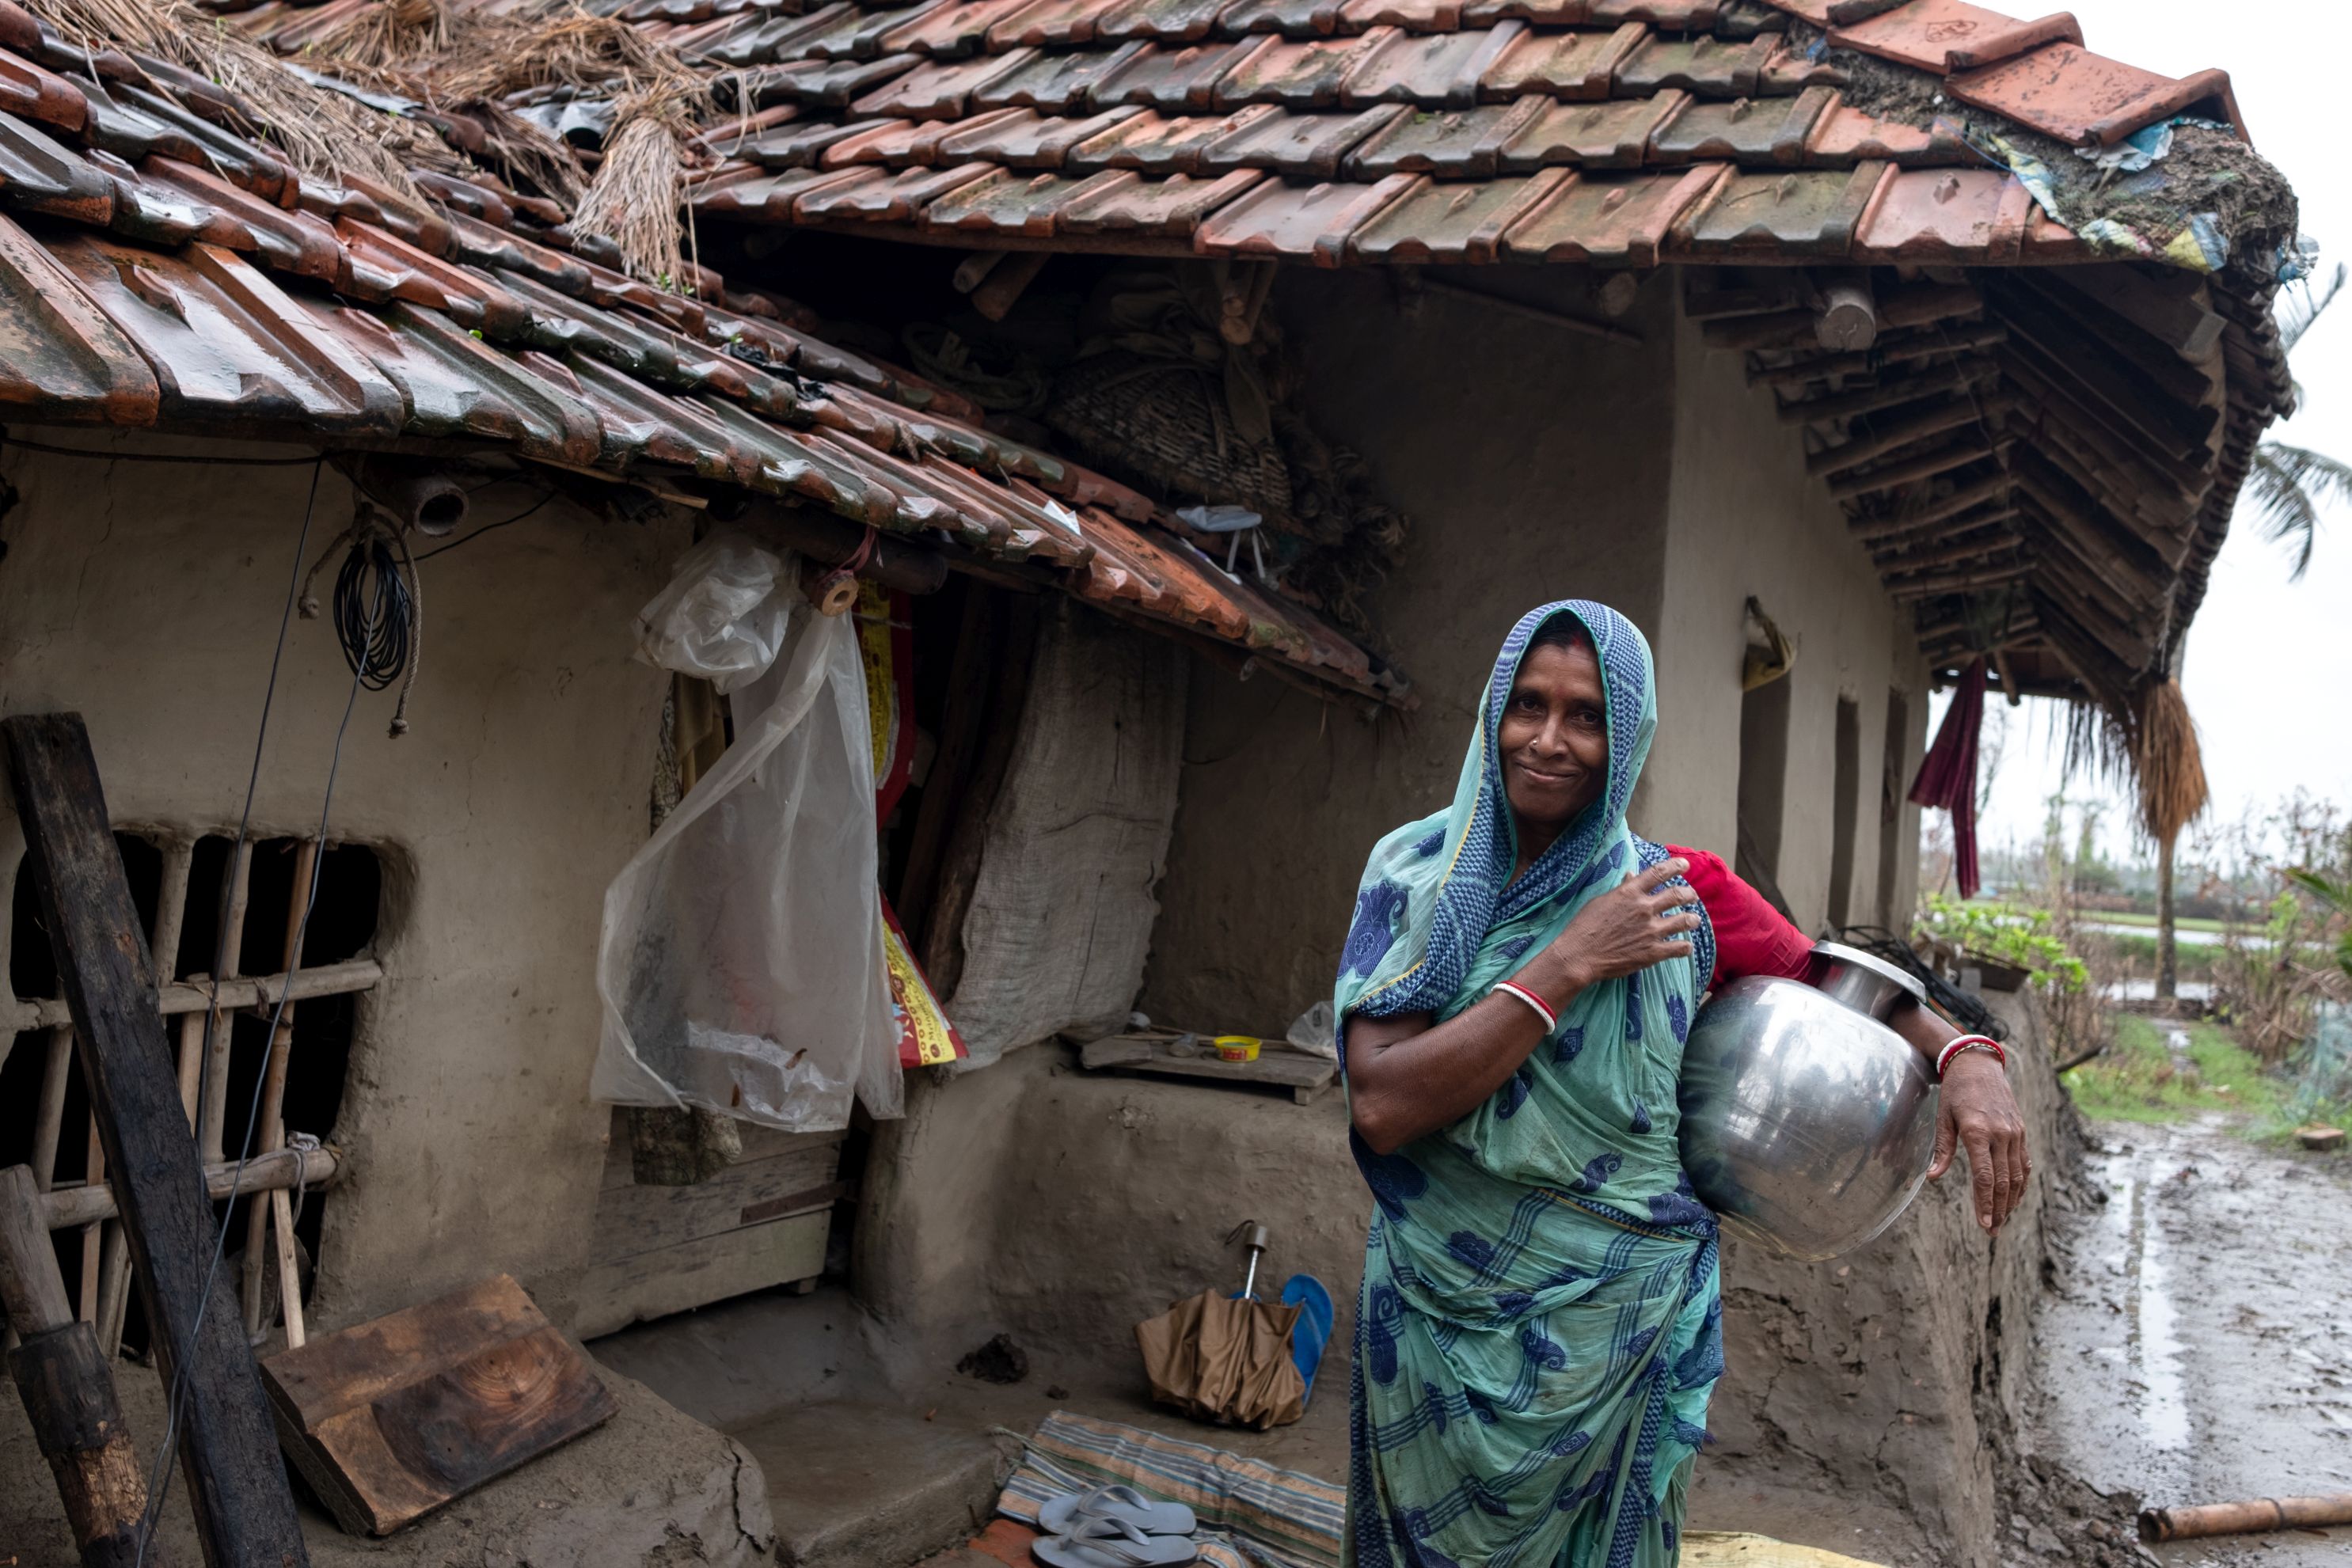 Dipti Das is worried about the dearth of water but is still trying to keep her spirits high for her family. (Image: WaterAid, Subhrajit Sen)  